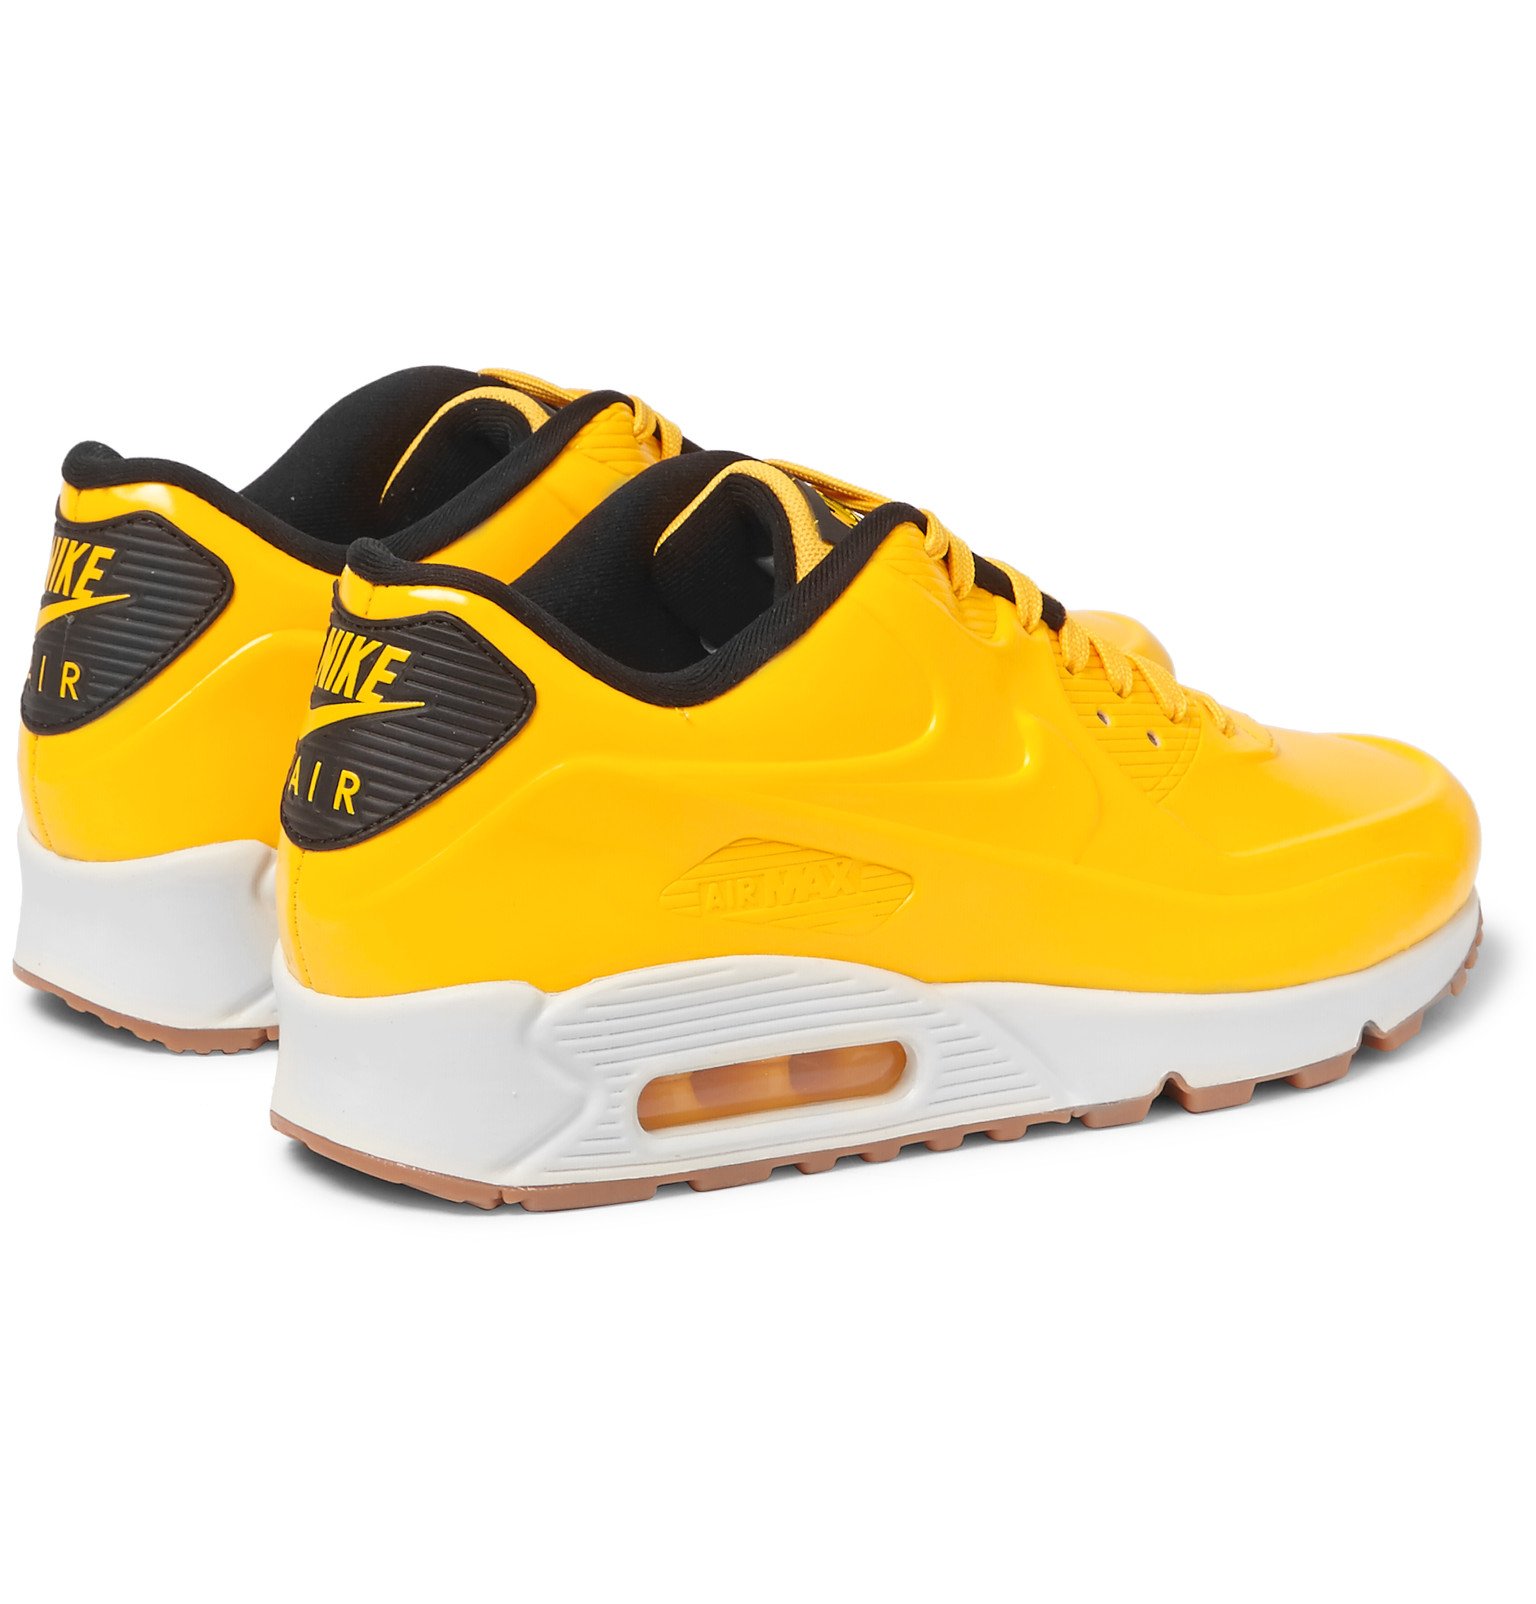 Nike Air Max 90 Vt Patent-leather Sneakers in Yellow for Men - Lyst